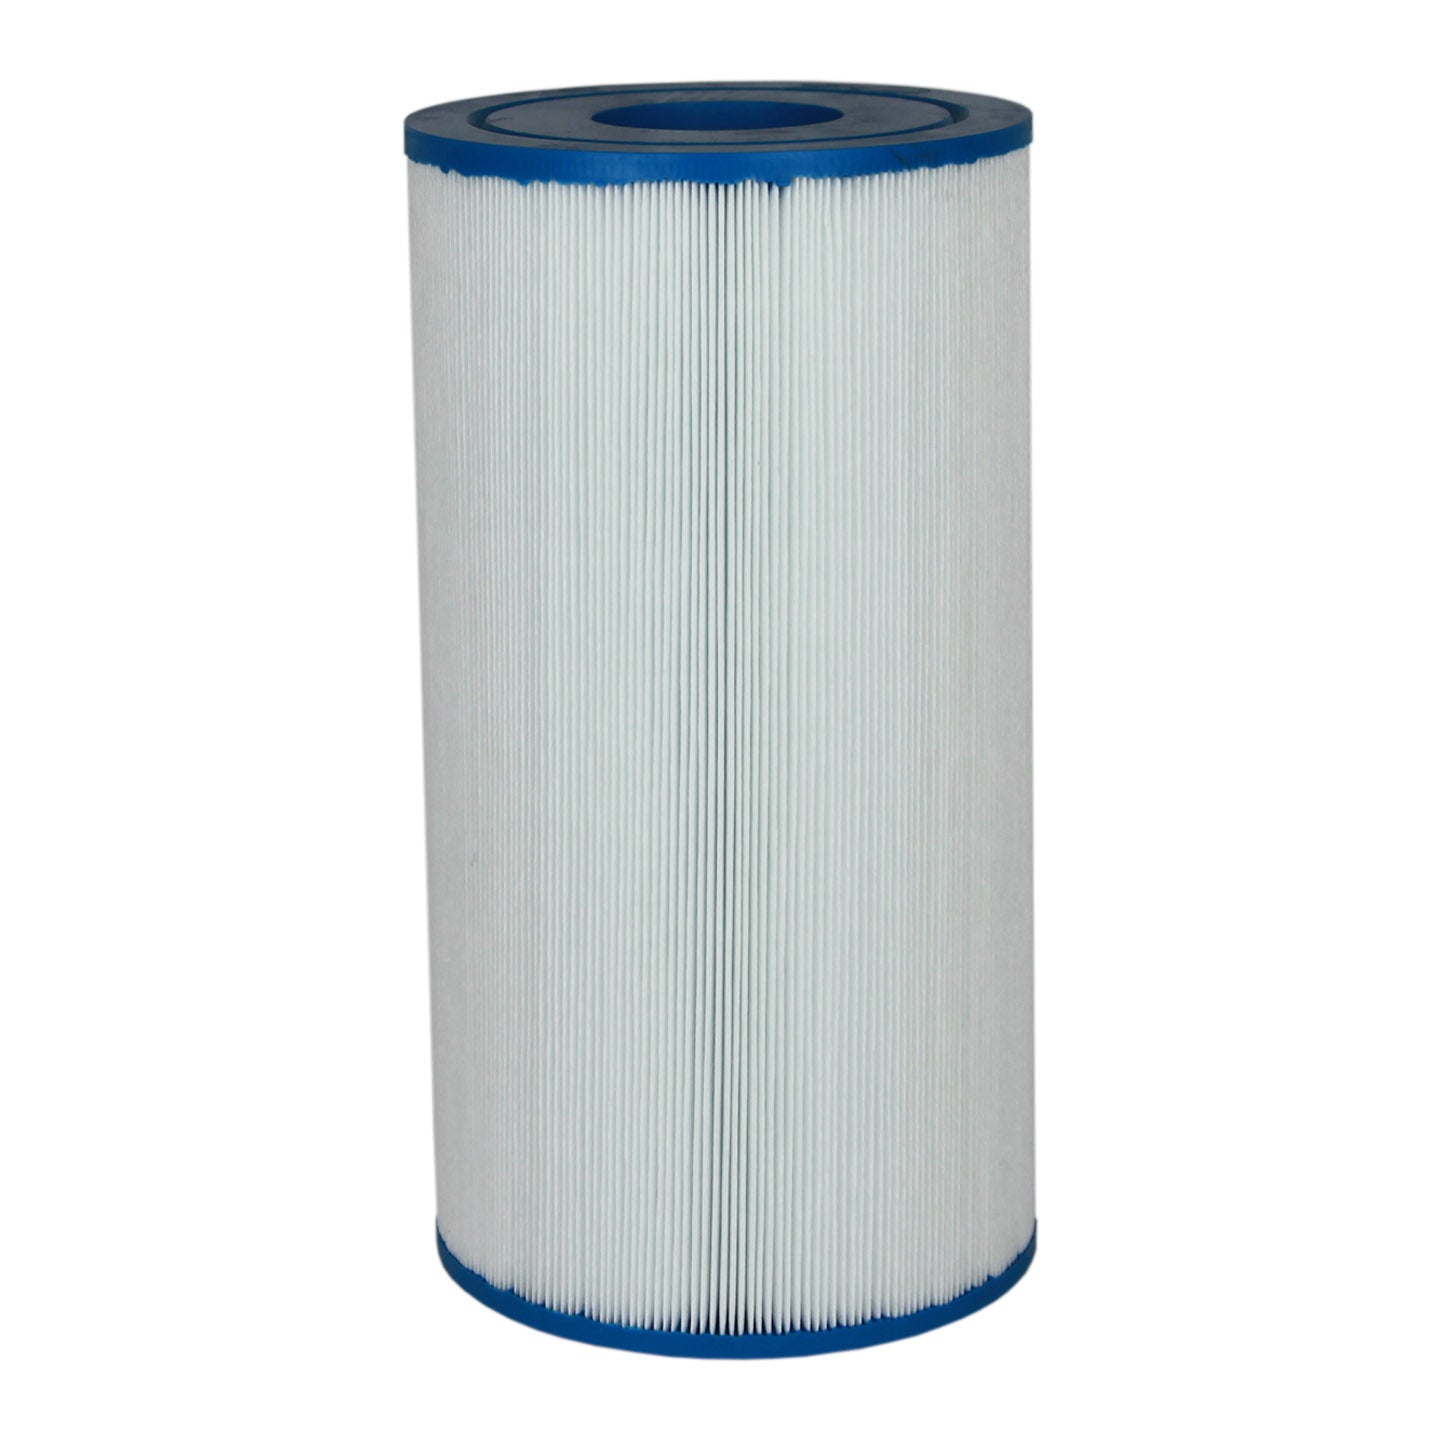 Tier1 Brand Replacement for 5 5/16-inch Diameter by 10-inch Length Filters